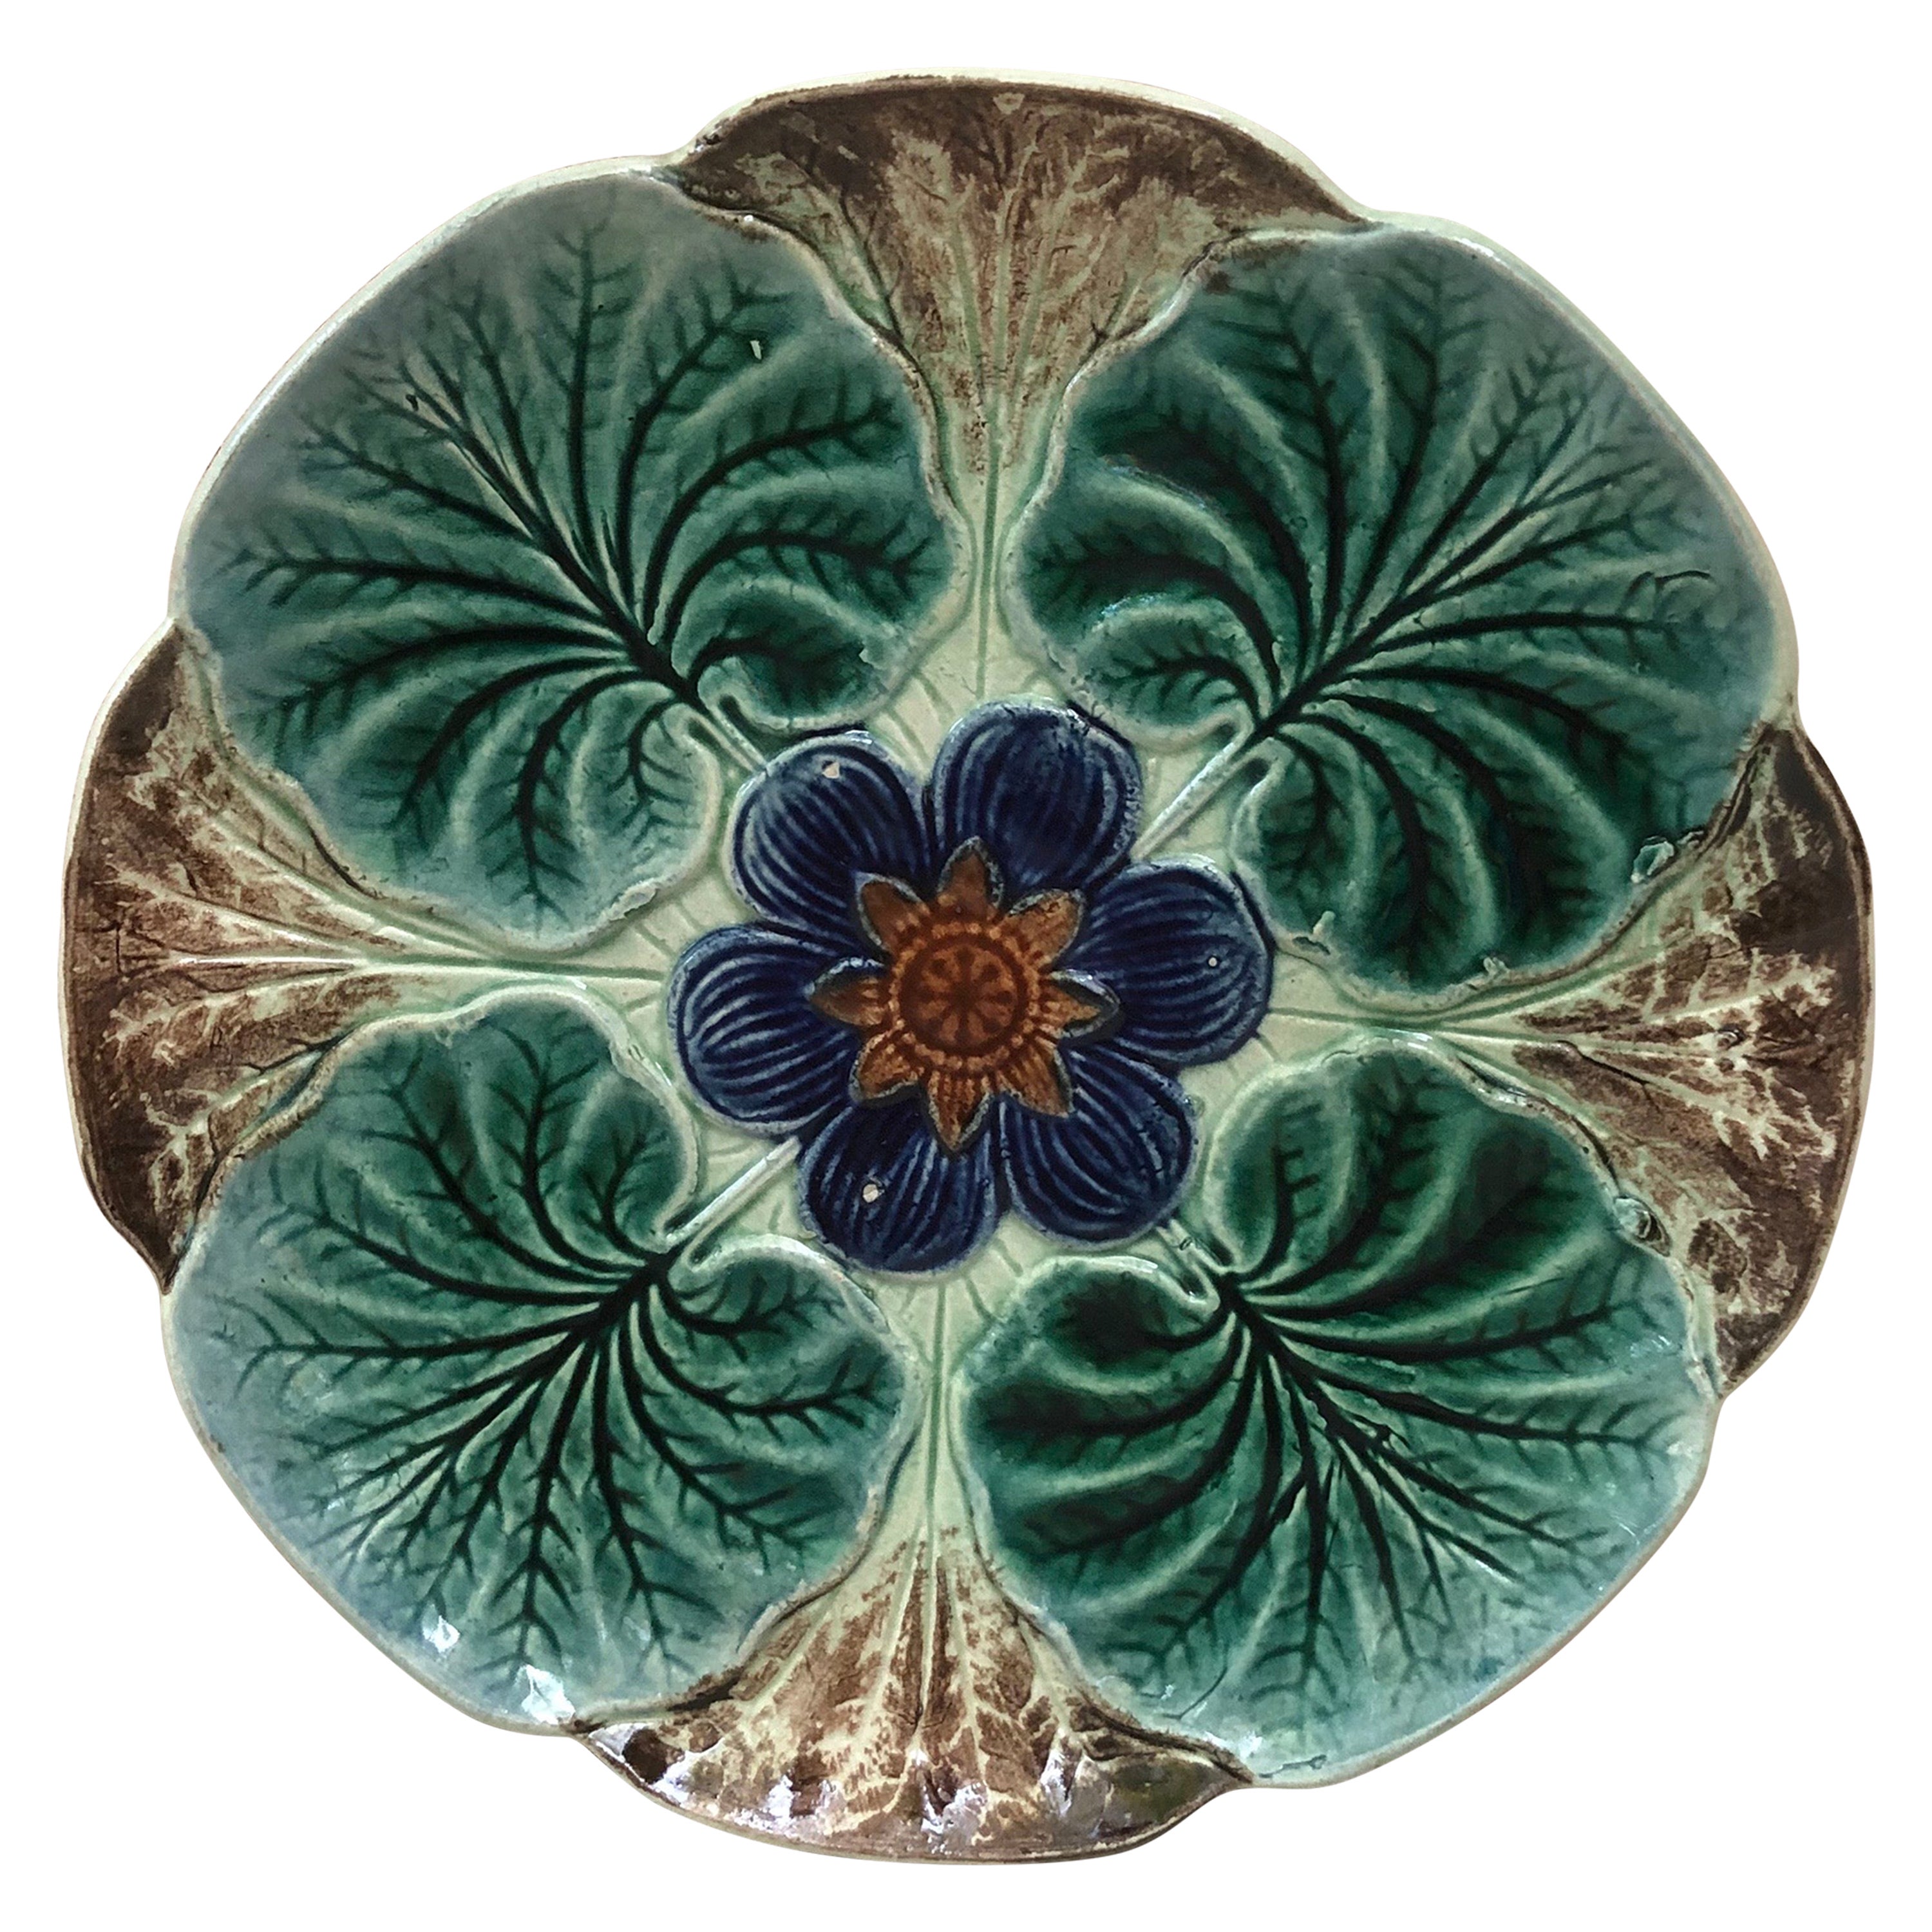 Majolica Water Lily Pond Plate Wasmuel, circa 1890